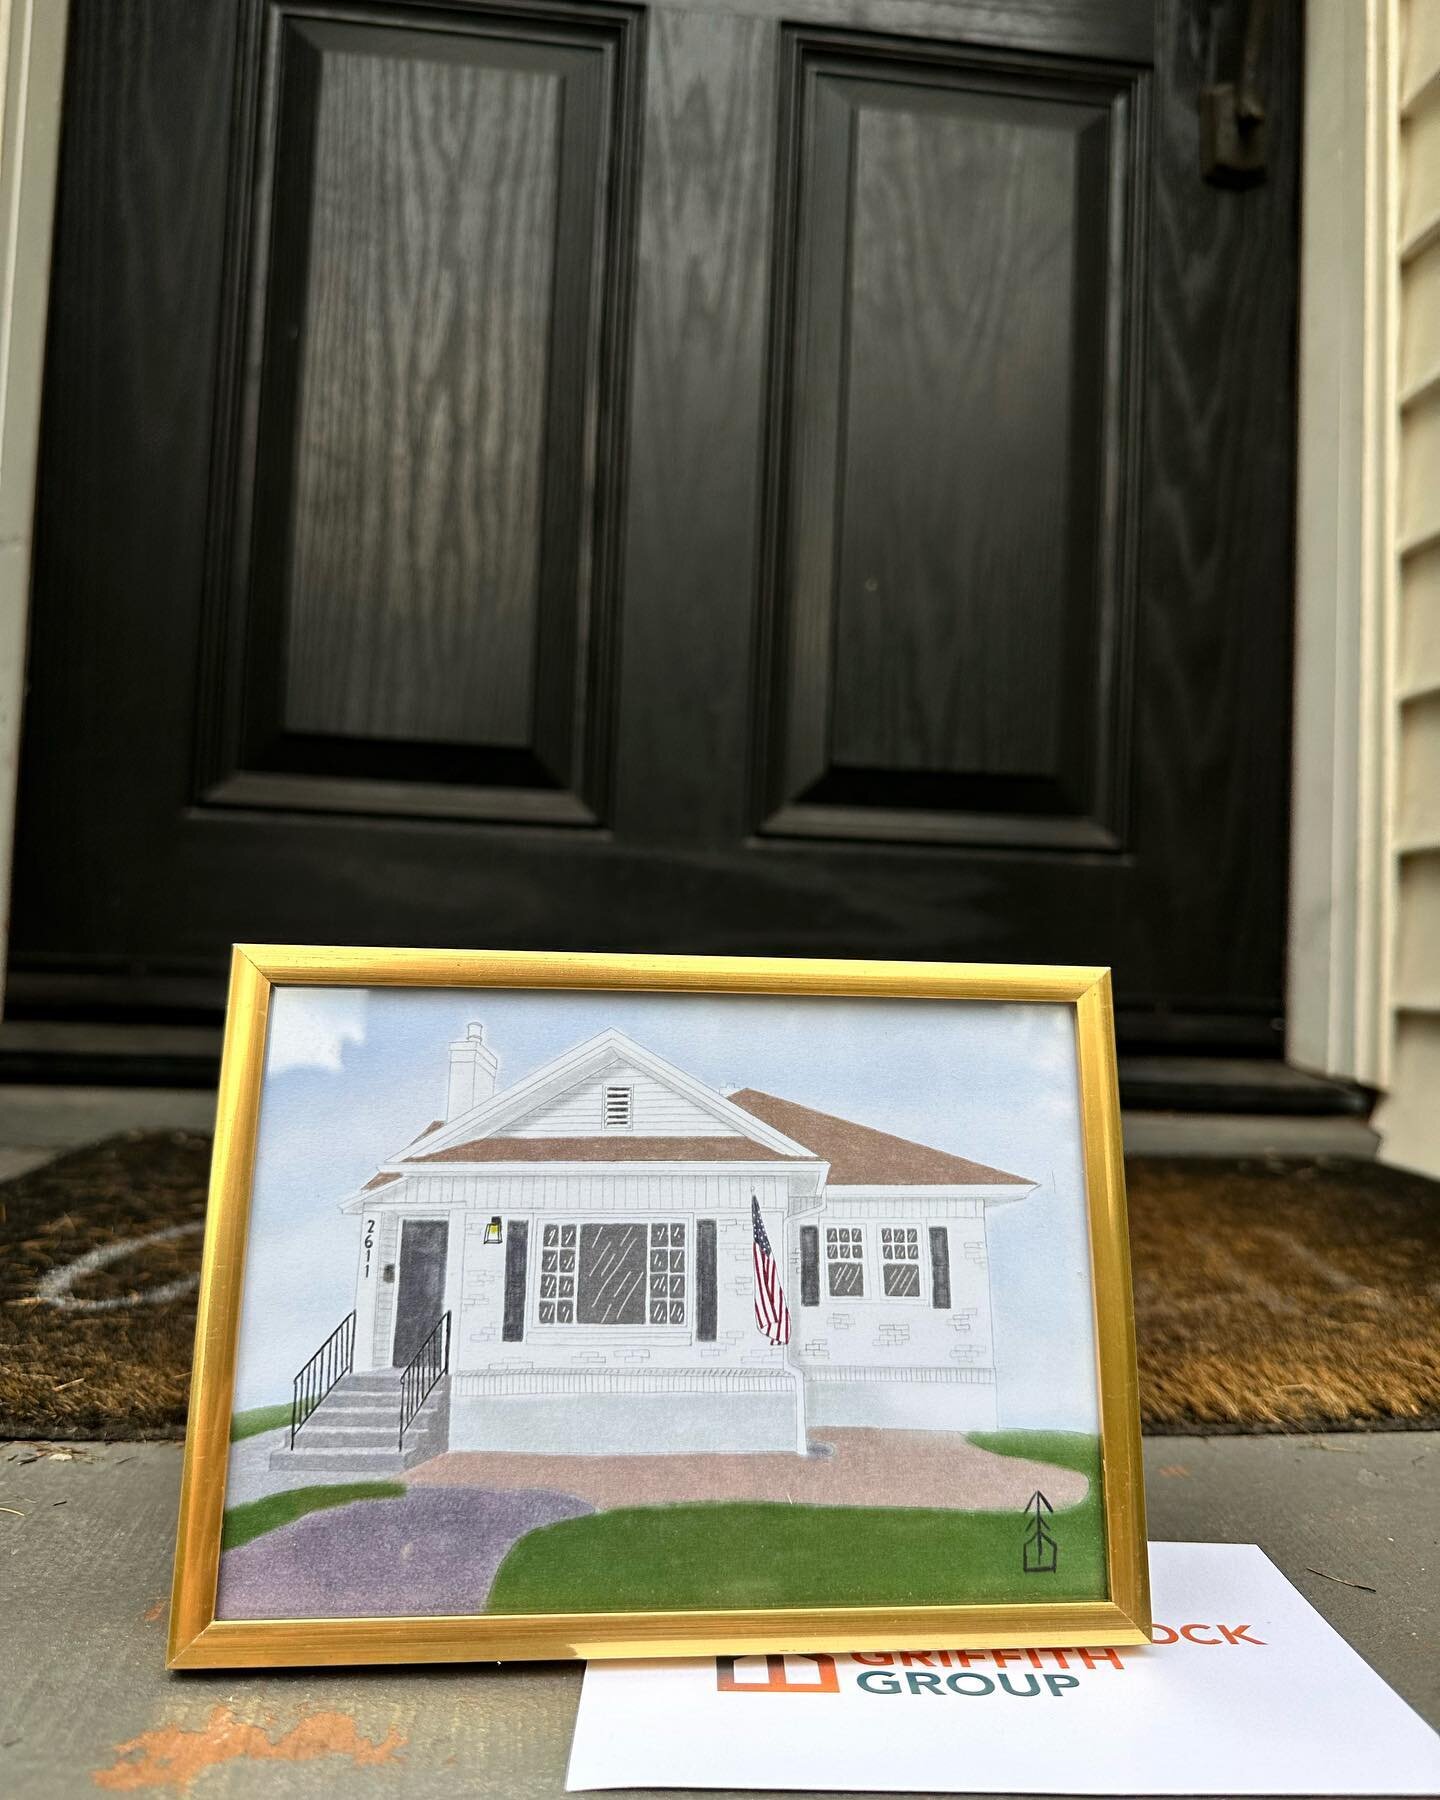 Another belated anniversary gift went out last week to some great clients on the South Hill. We love drawing these homes and celebrating these big milestones with you!

#spokane
#spokanedoesntsuck 
#spokanerealtor
#housedrawing
#anniversarygift
#idah